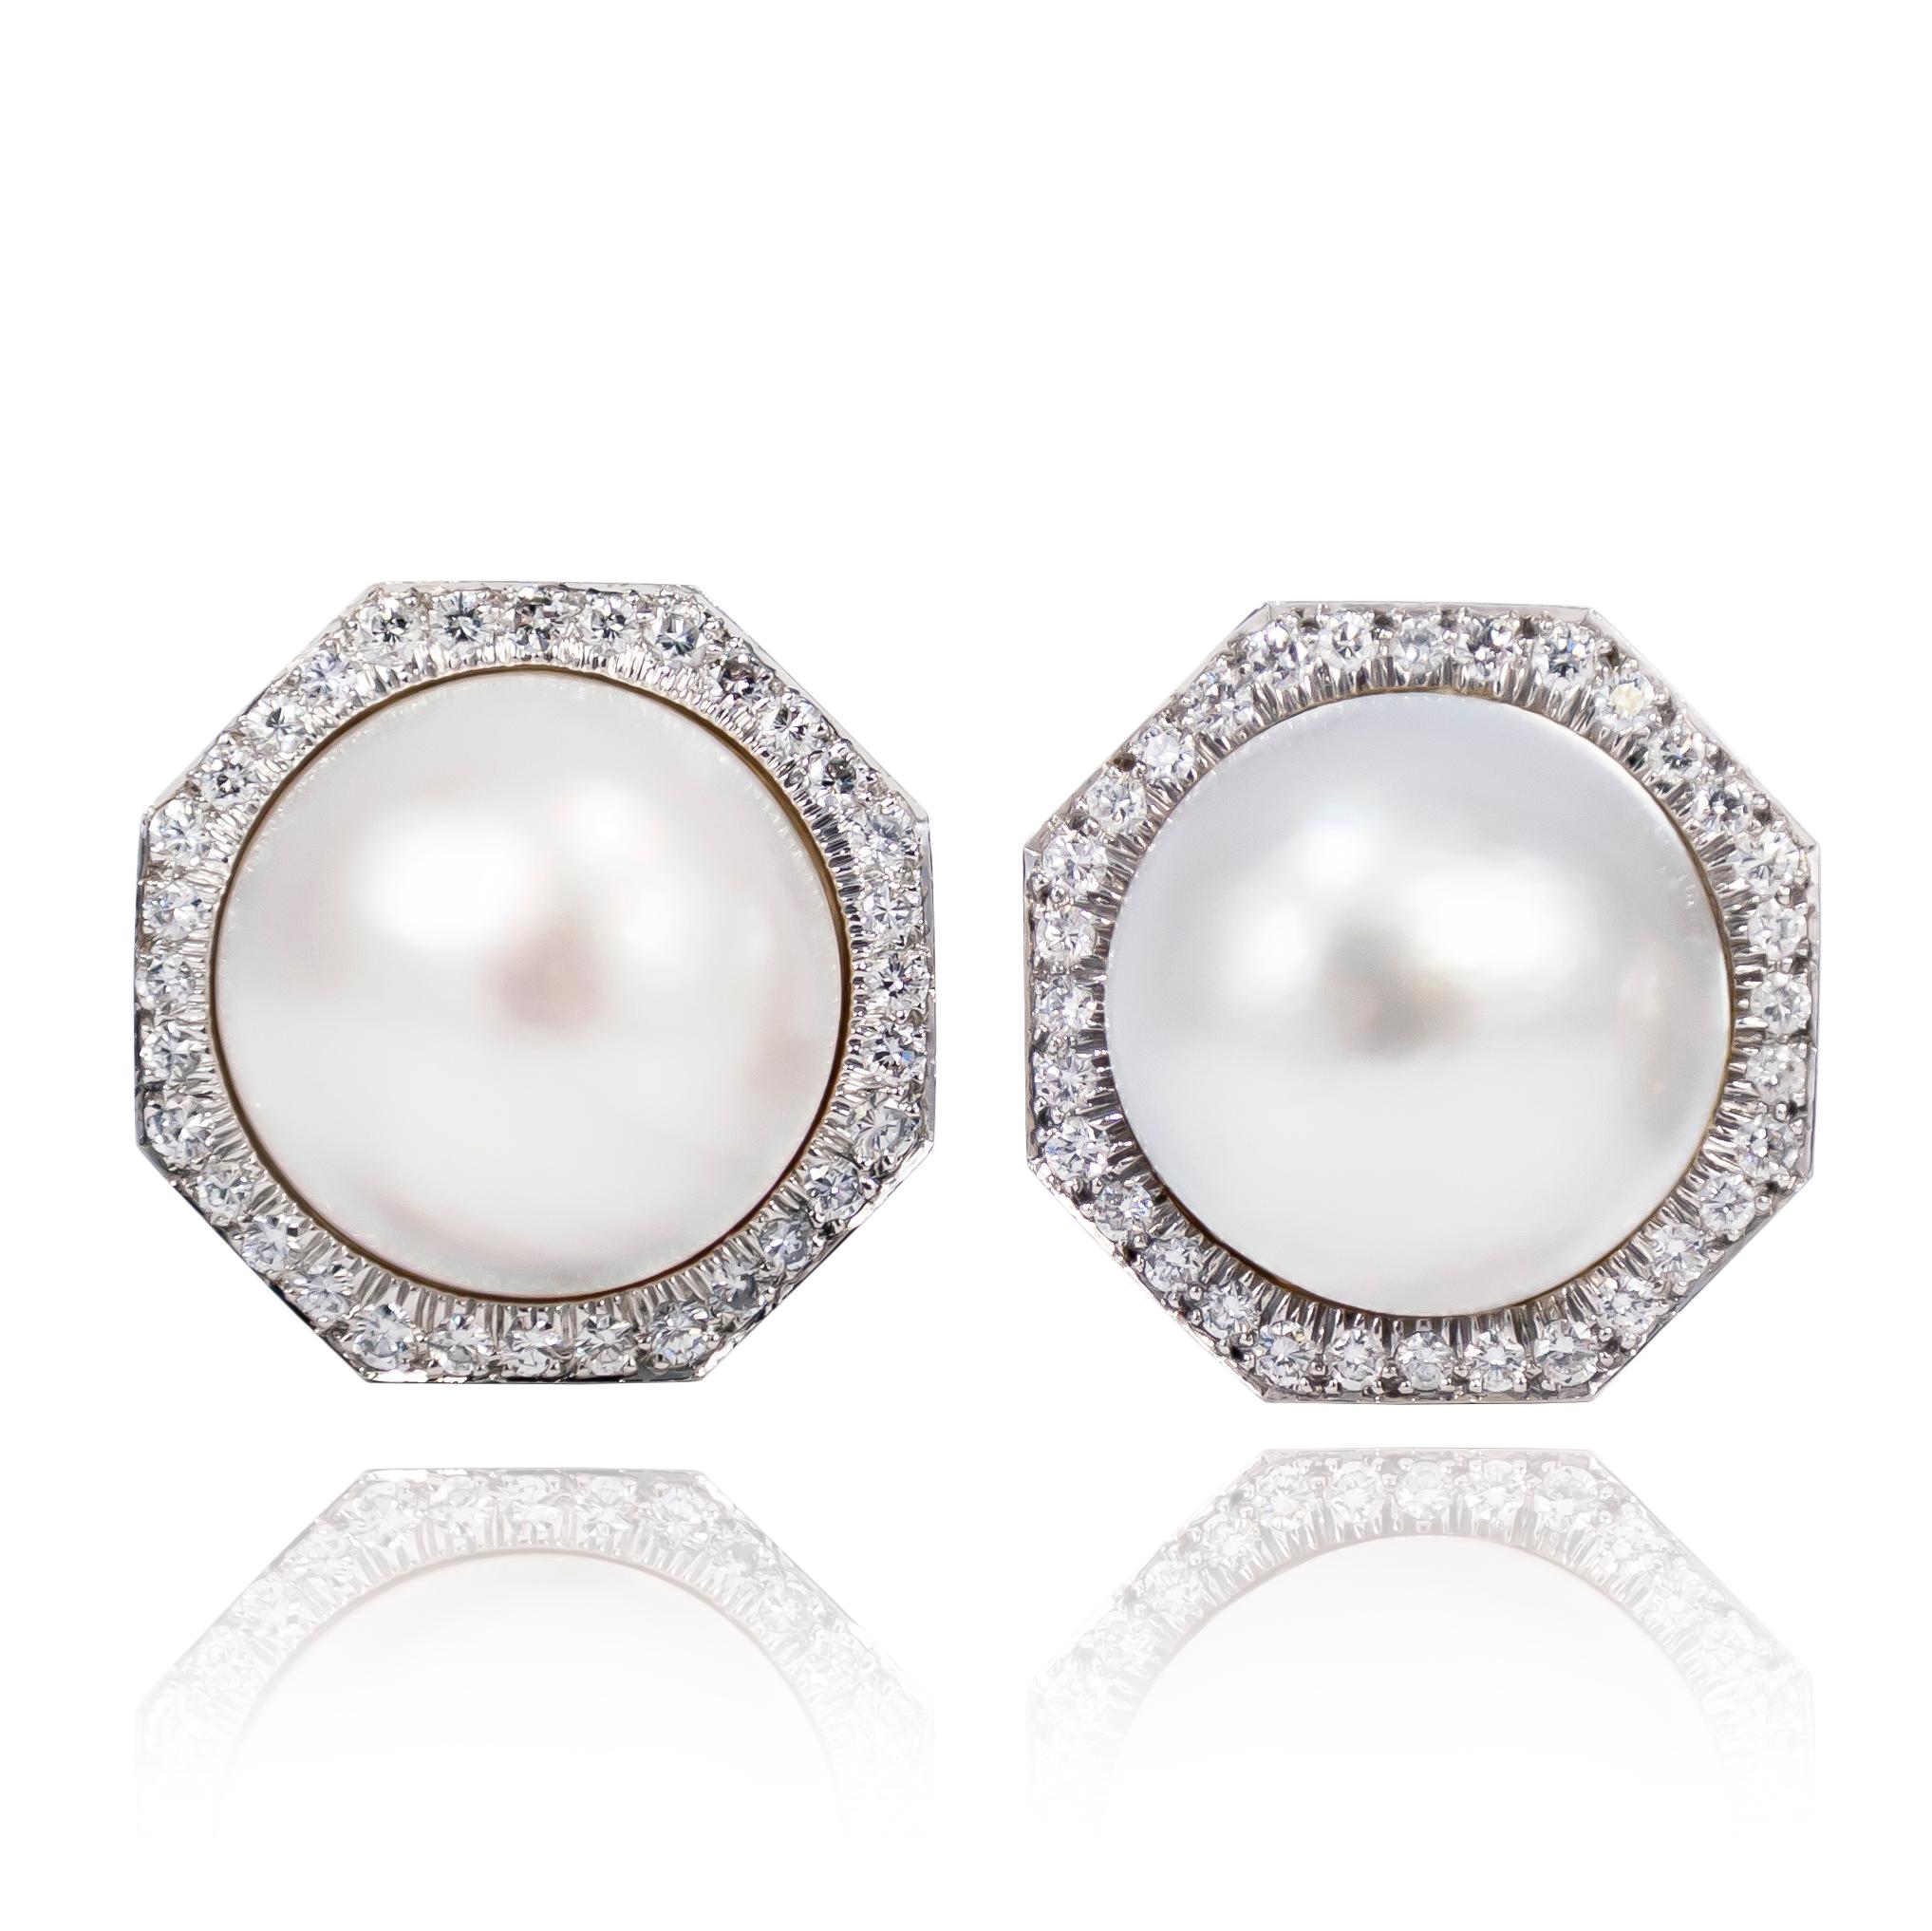 These incredibly sophisticated signed David Webb earrings feature a pair of Mabe Pearls (one with rose pink overtones, the other with cool blue overtones) and bright-cut set brilliant round diamonds. Classic with a bold aesthetic, these earrings